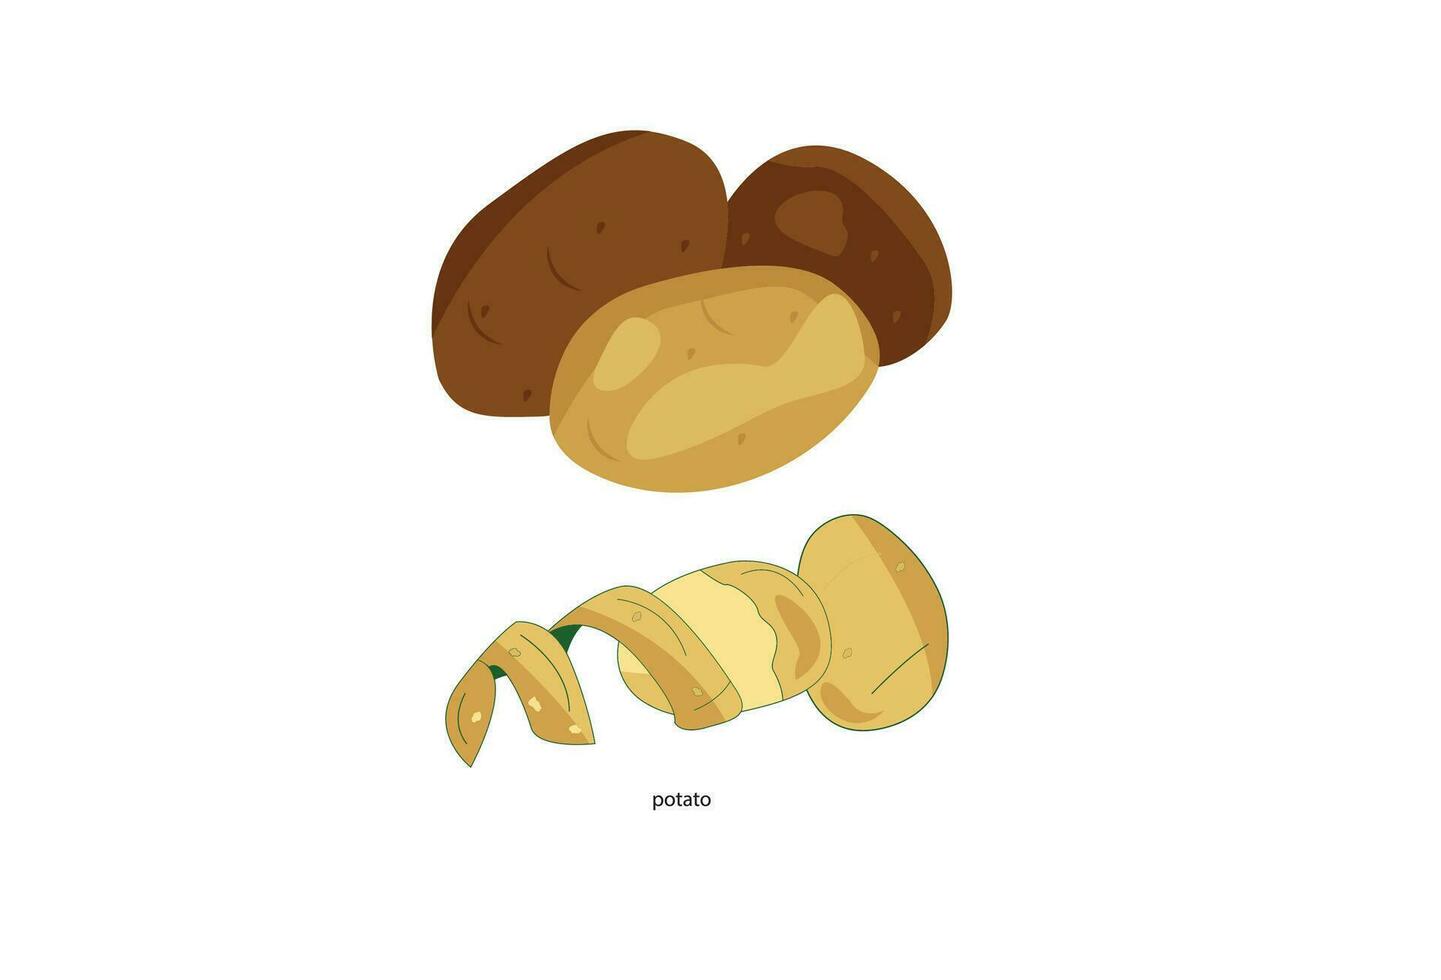 A collection of potato icons including chips, pancakes, french fries, and whole root potatoes depicted in a cartoon realistic style. The vector illustration showcases a variety of harvest vegetables.